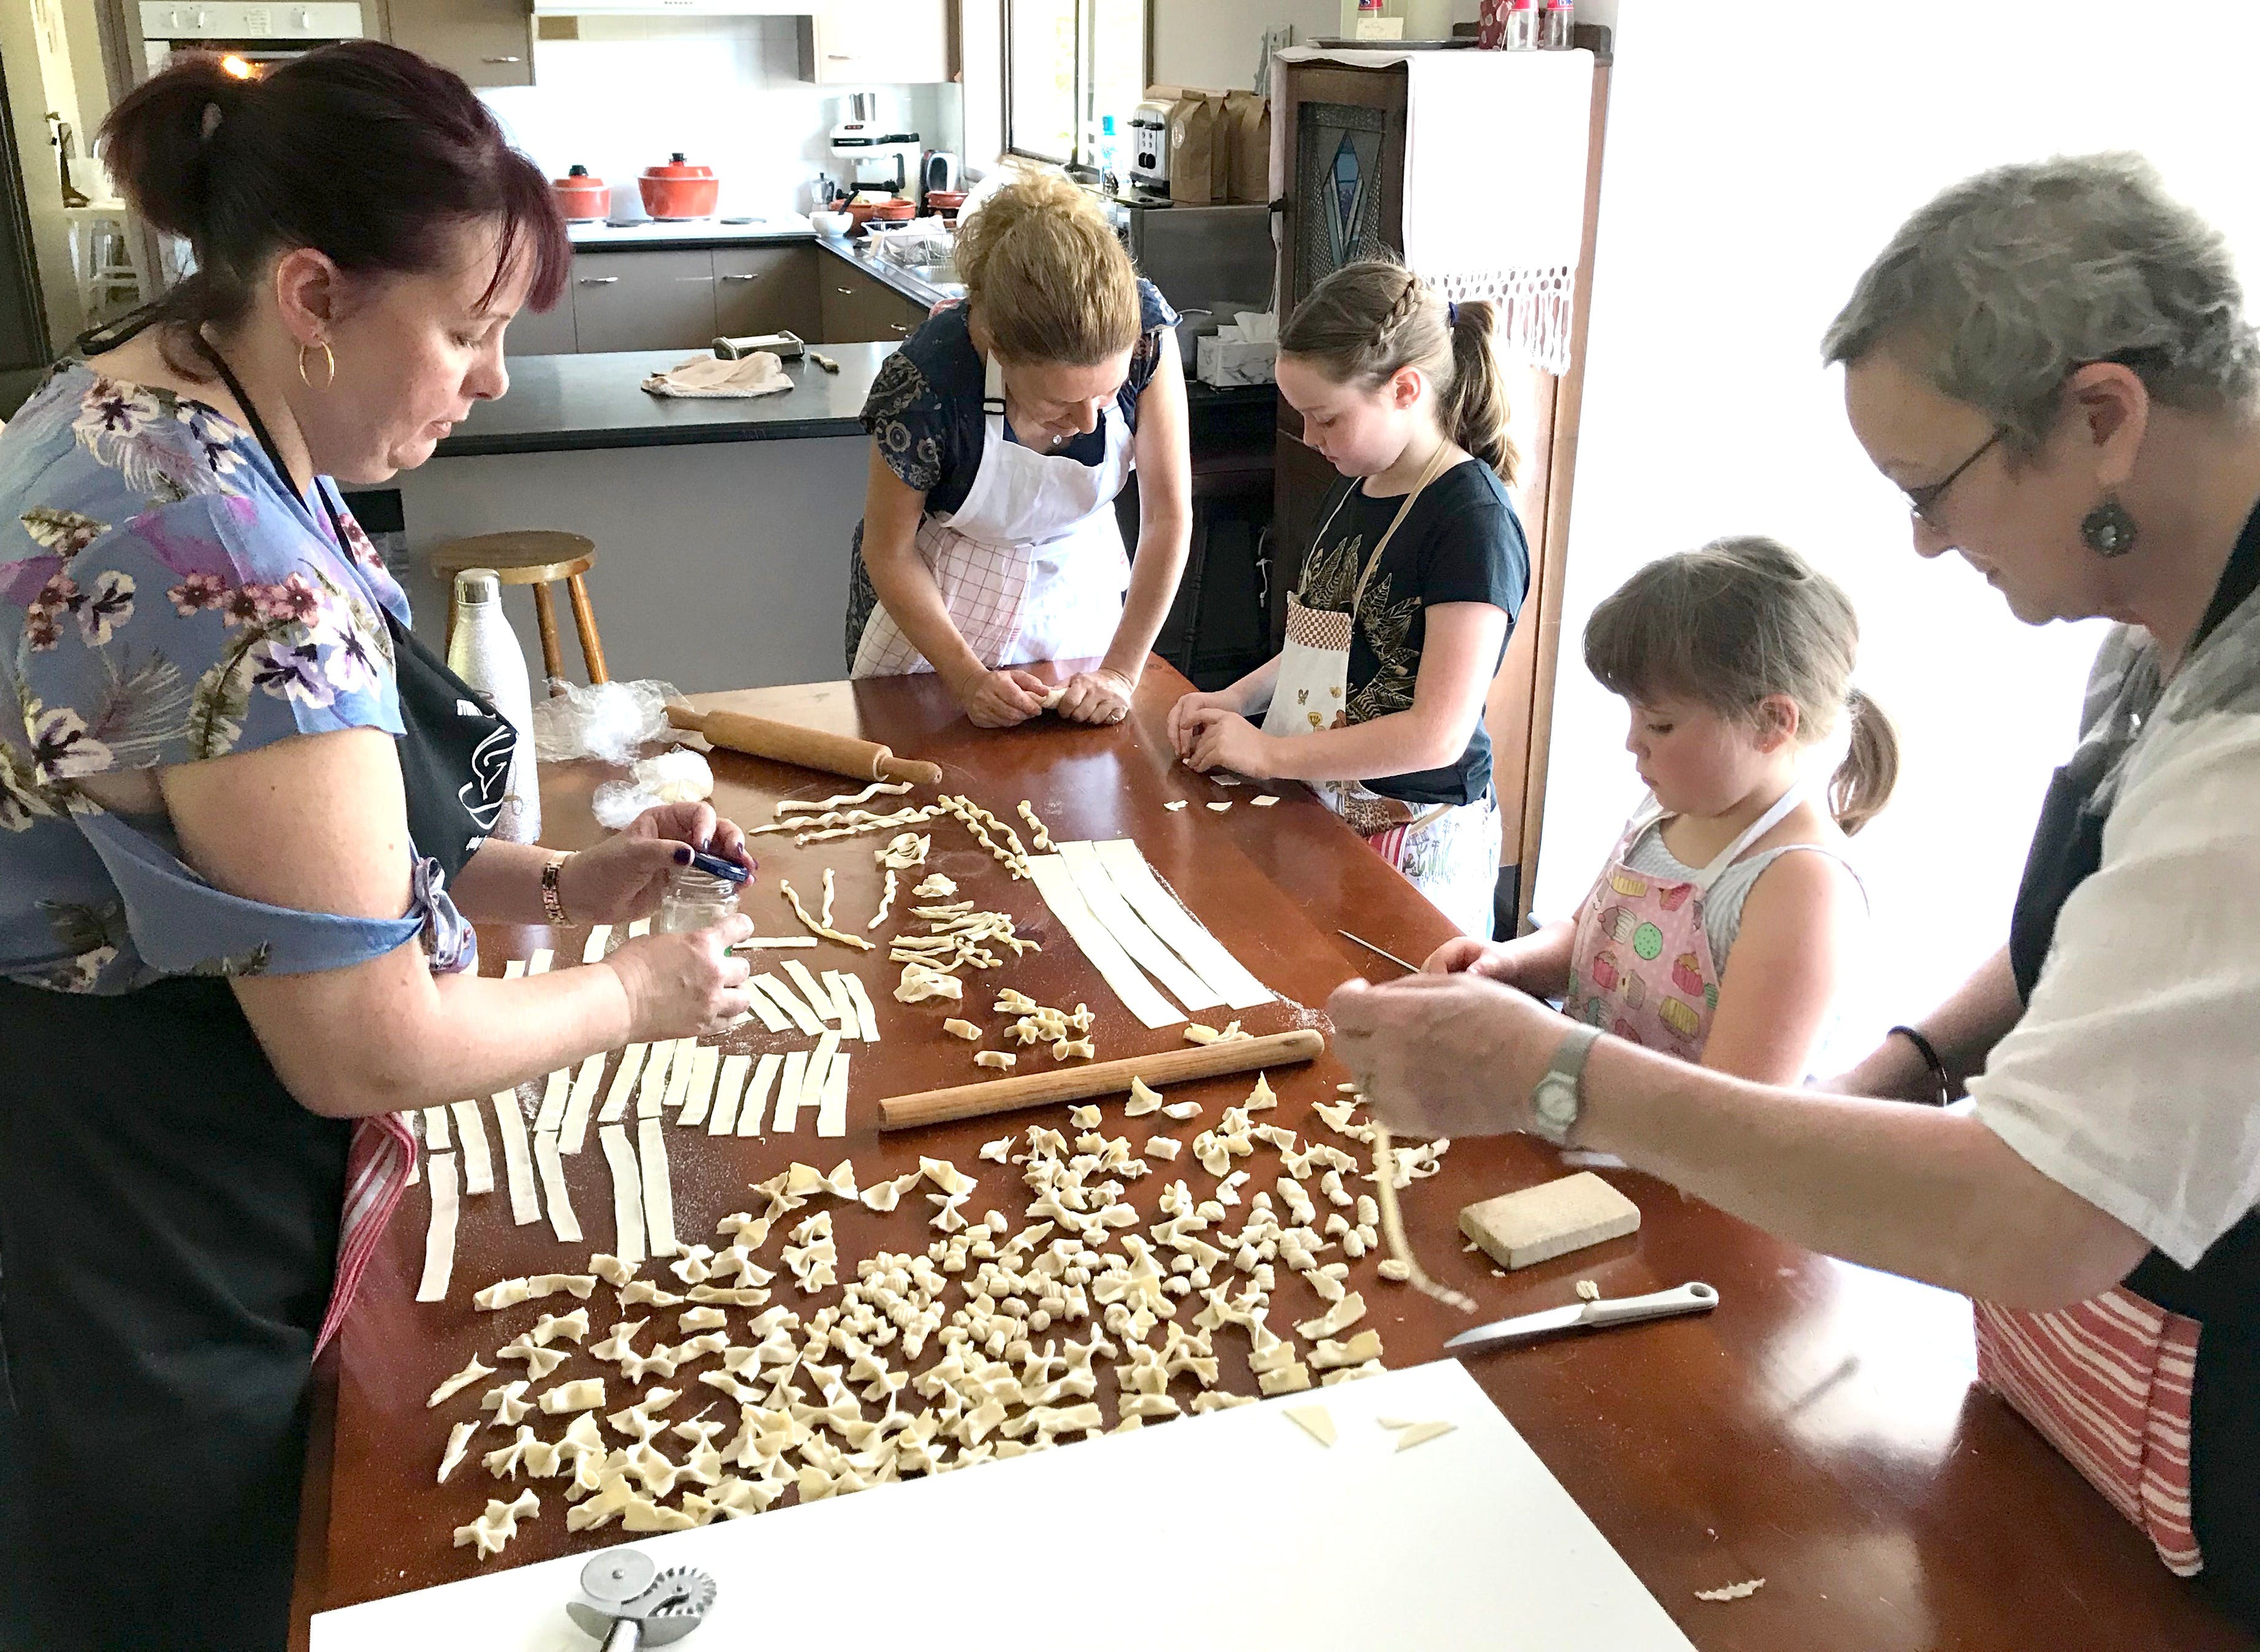 Kids Pasta Making Class - hands on fun at your house - Accommodation Airlie Beach